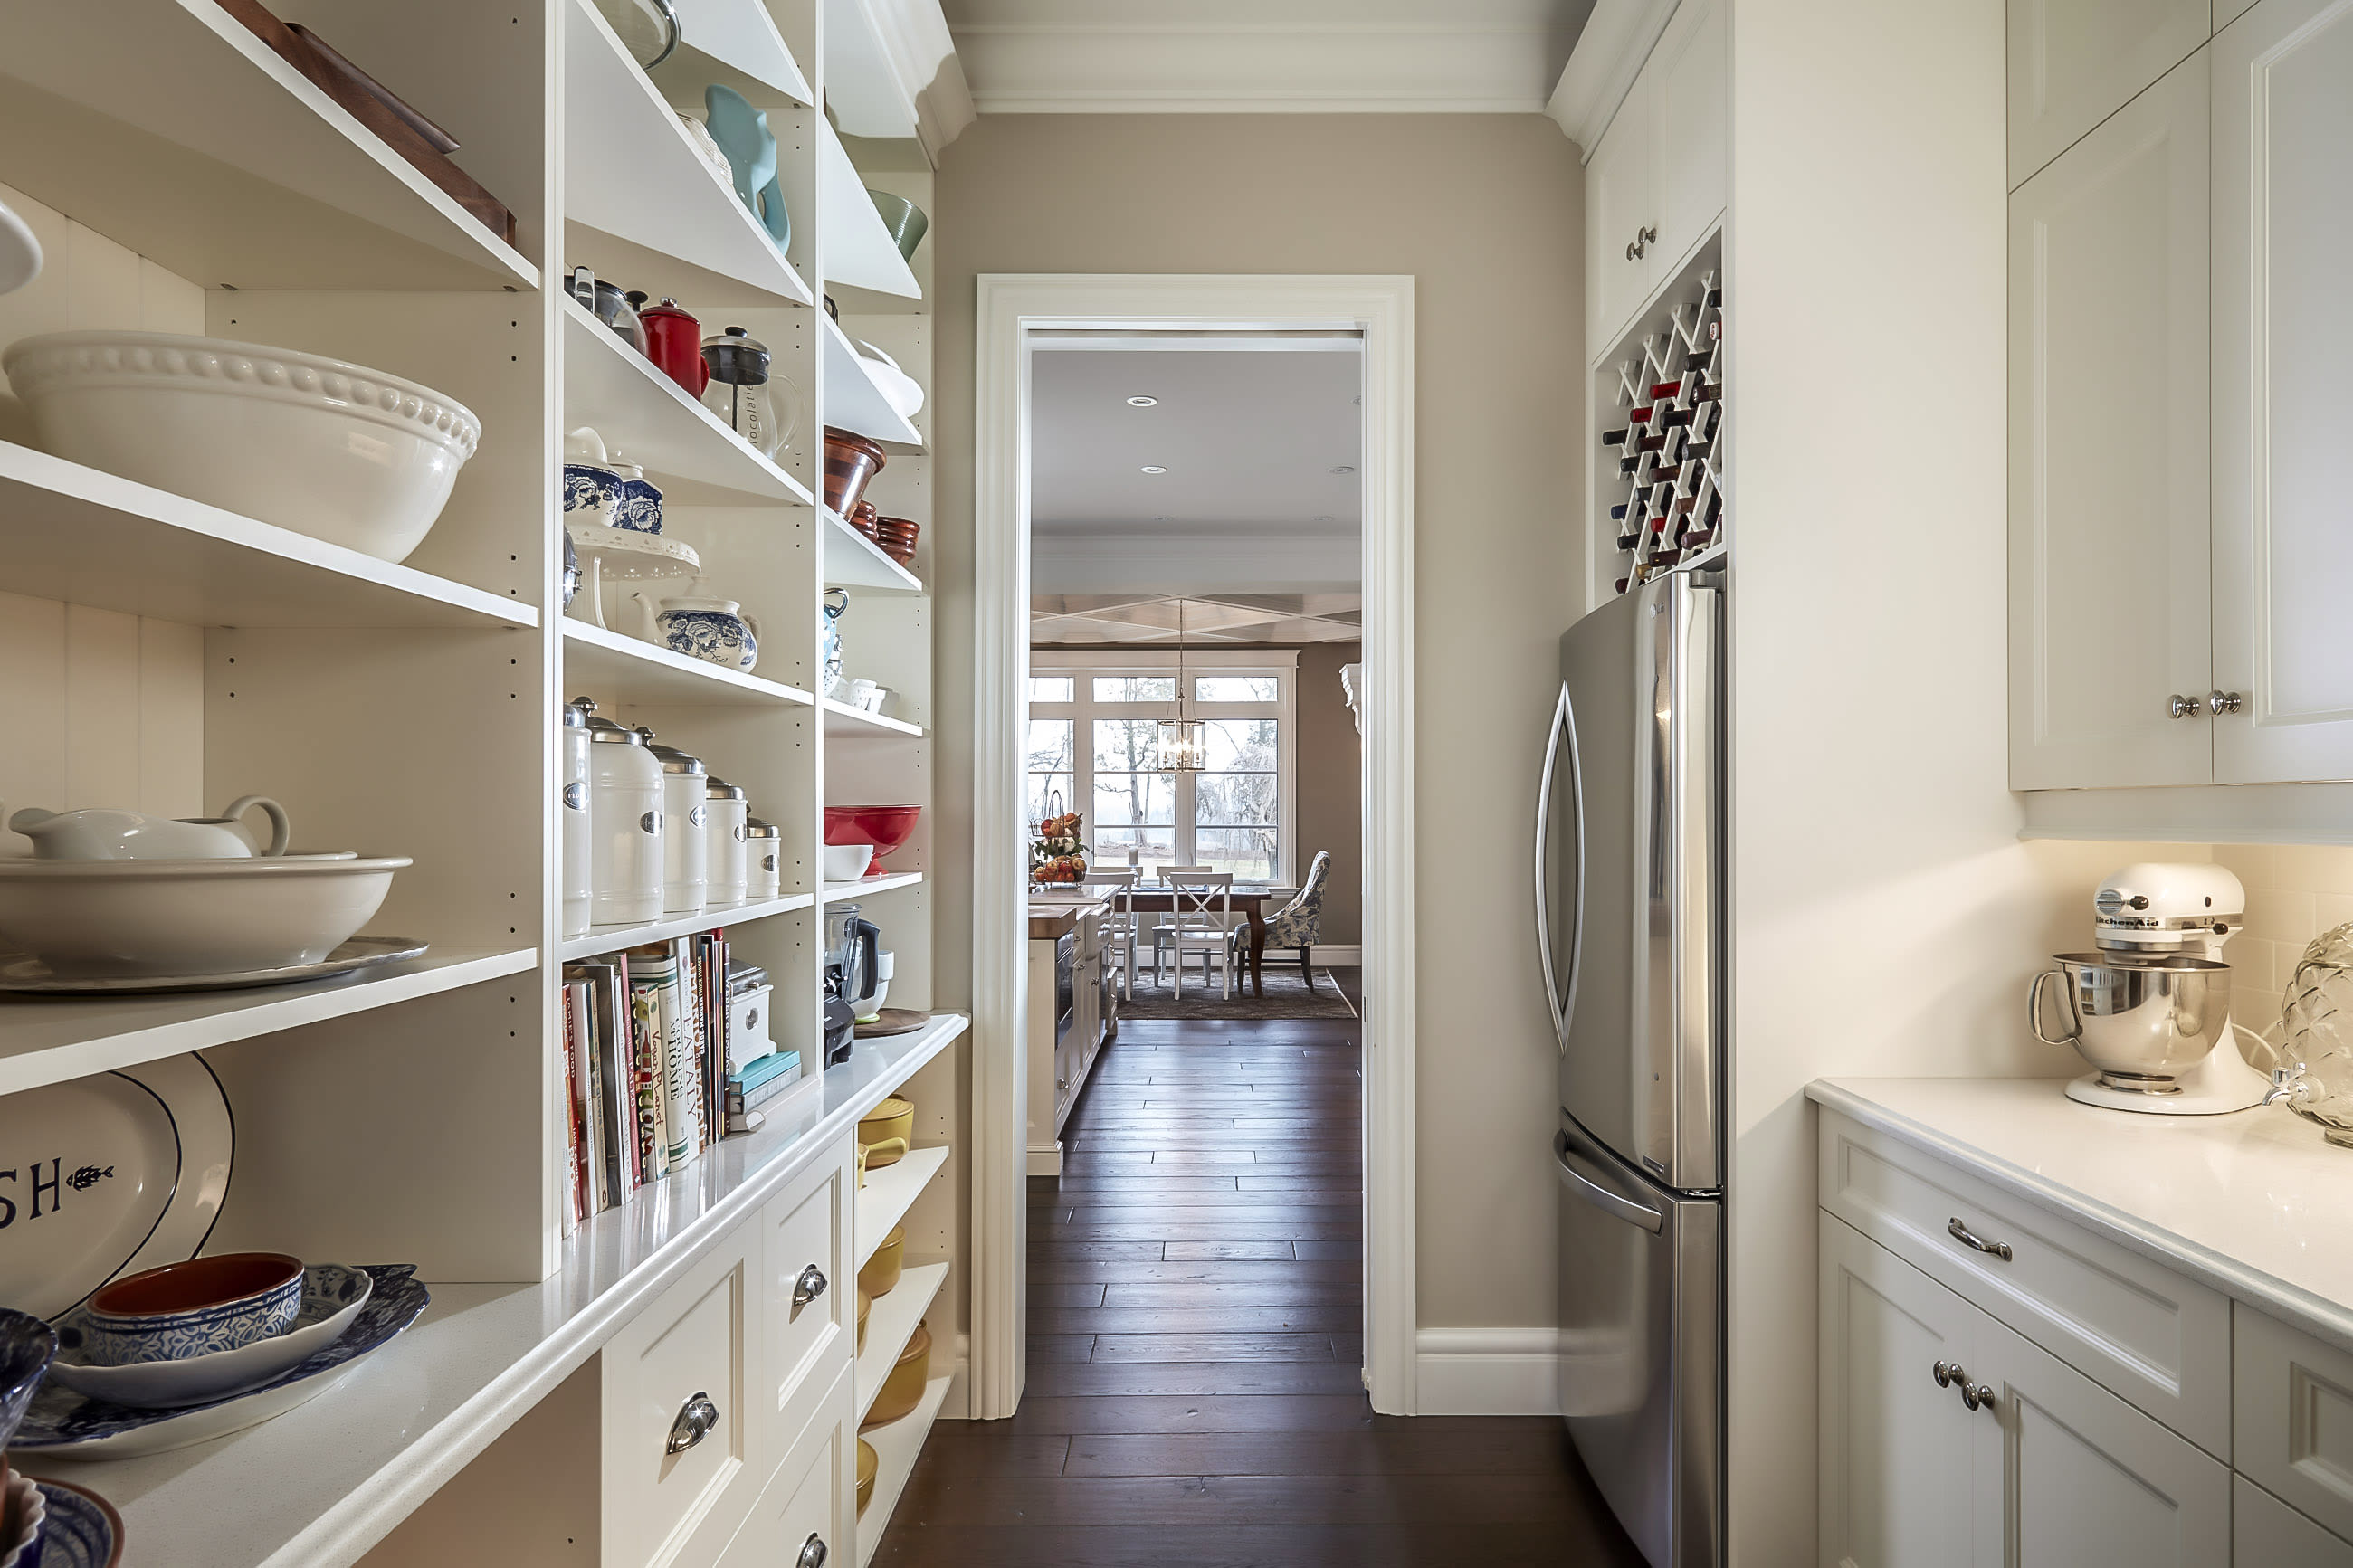 A butlers pantry with open shelving and wine rack above fridge